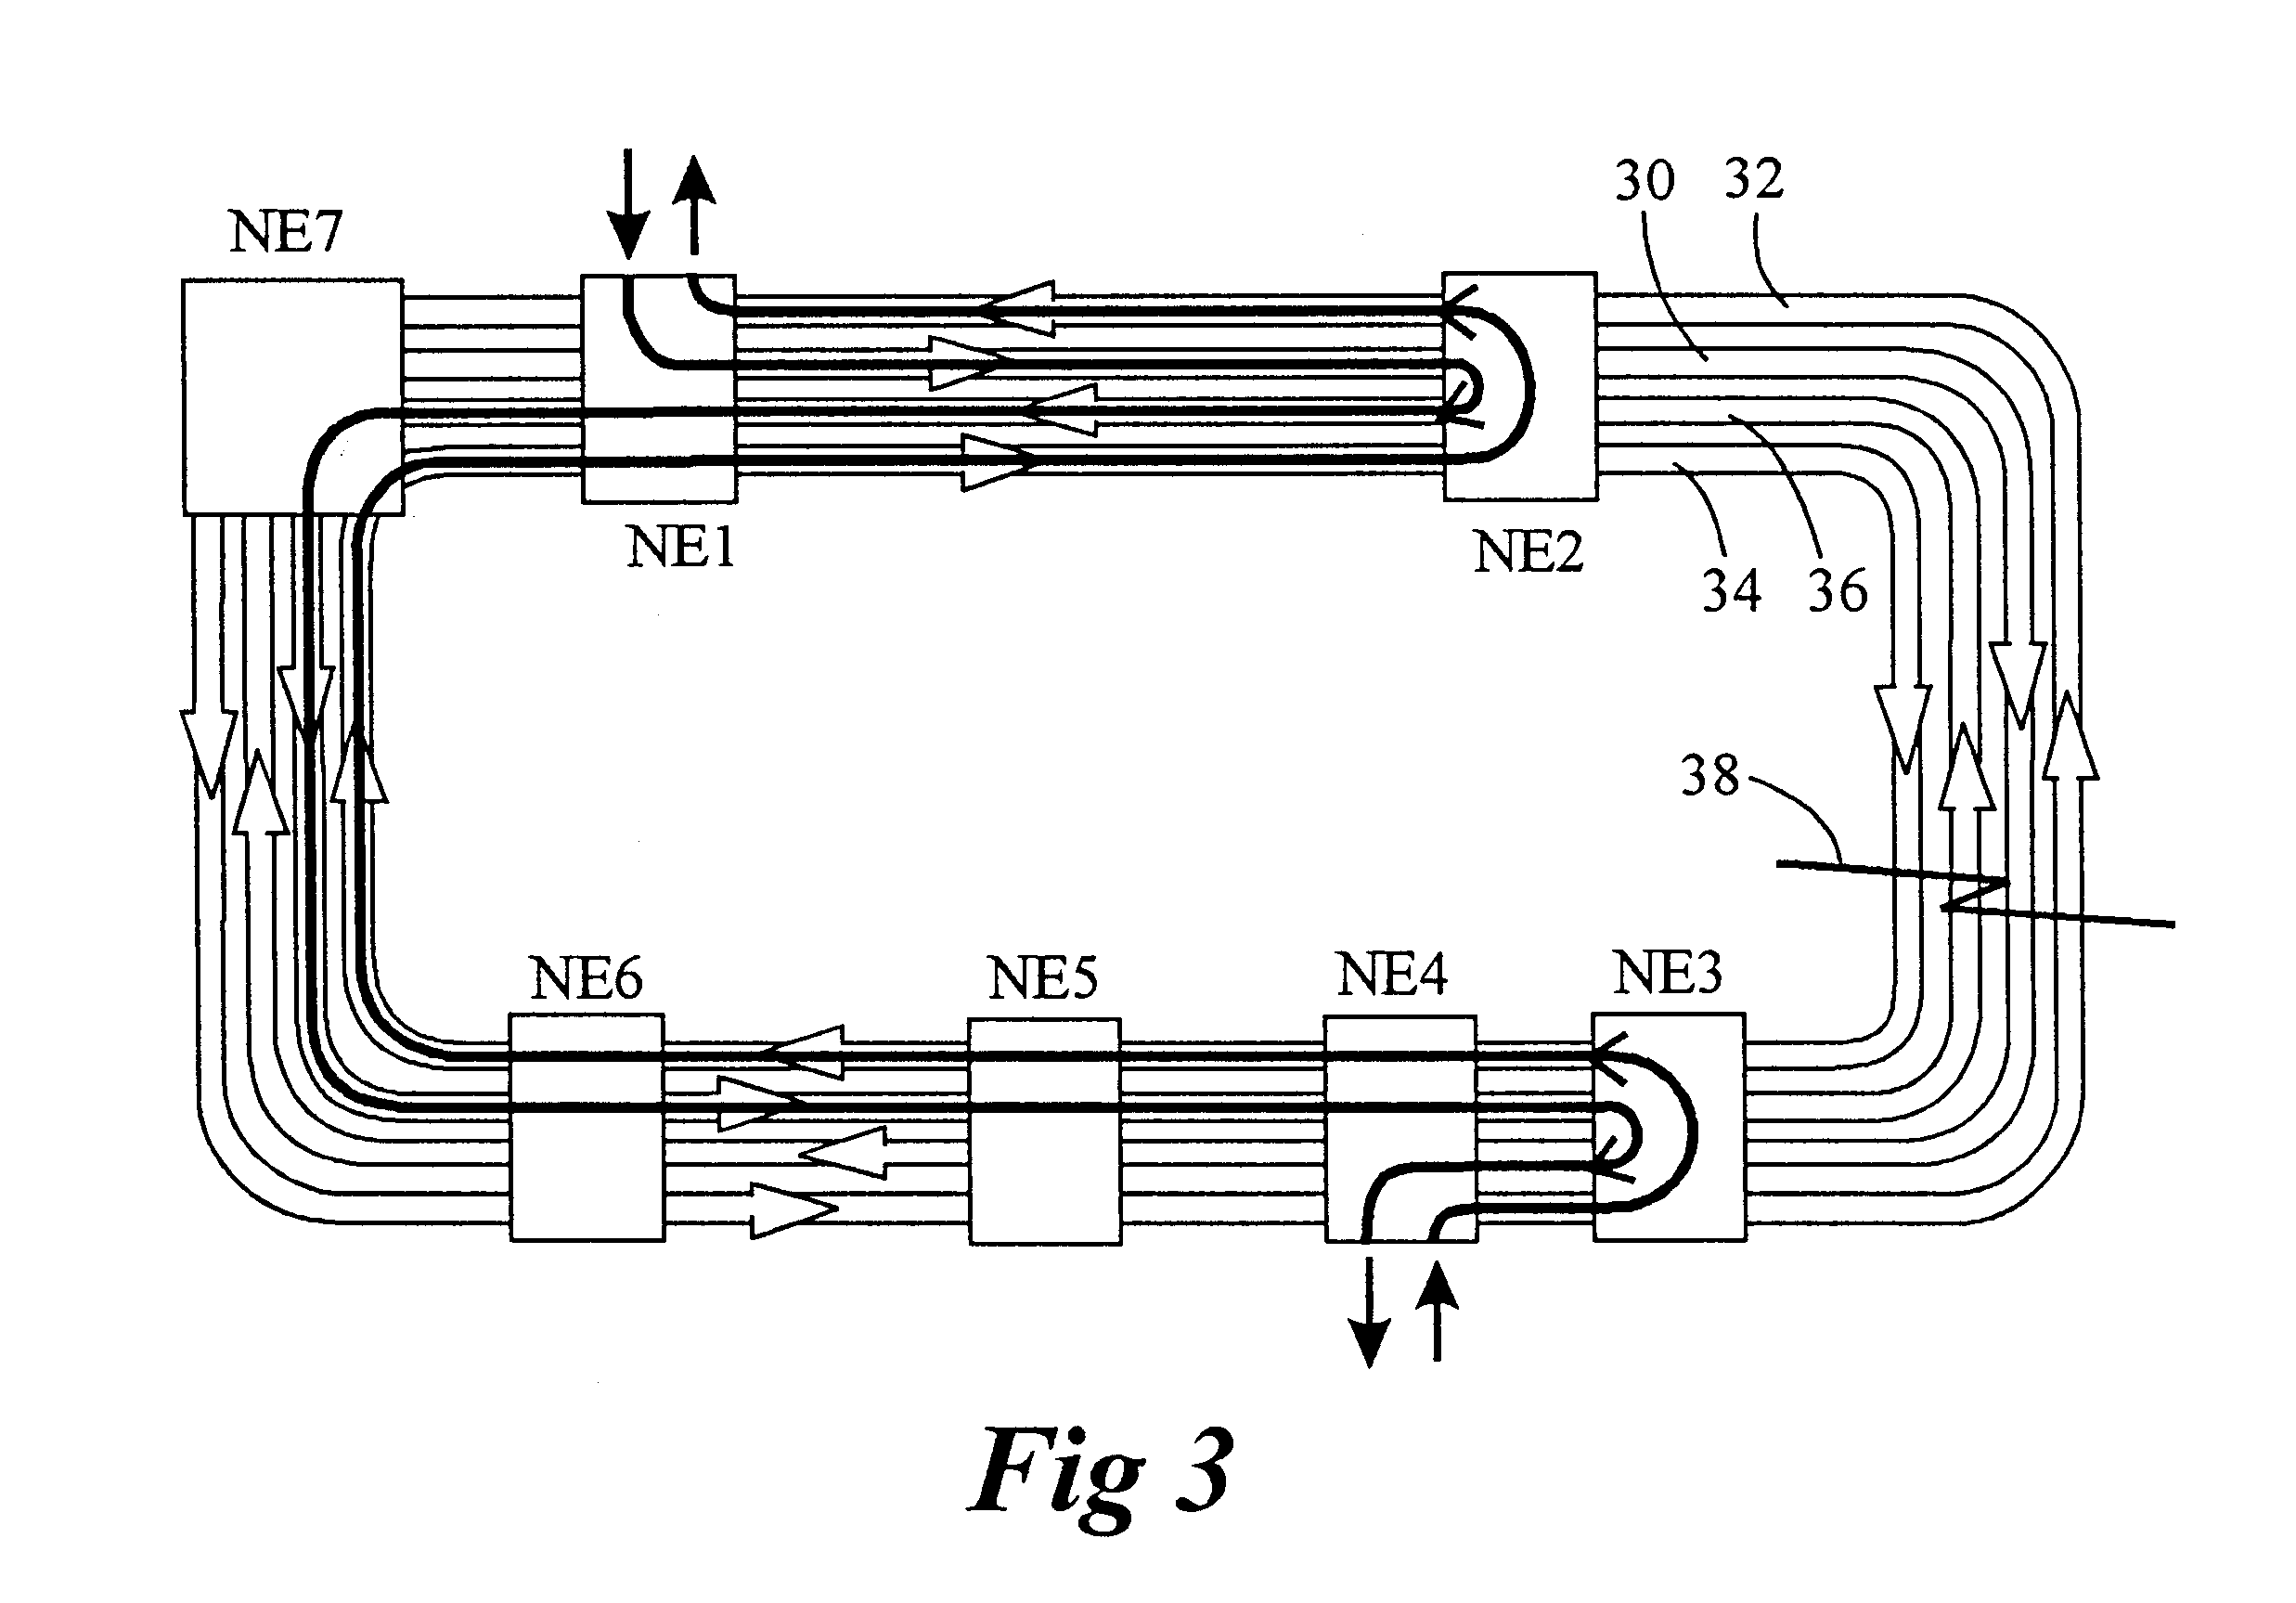 Optical inter-ring protection having matched nodes